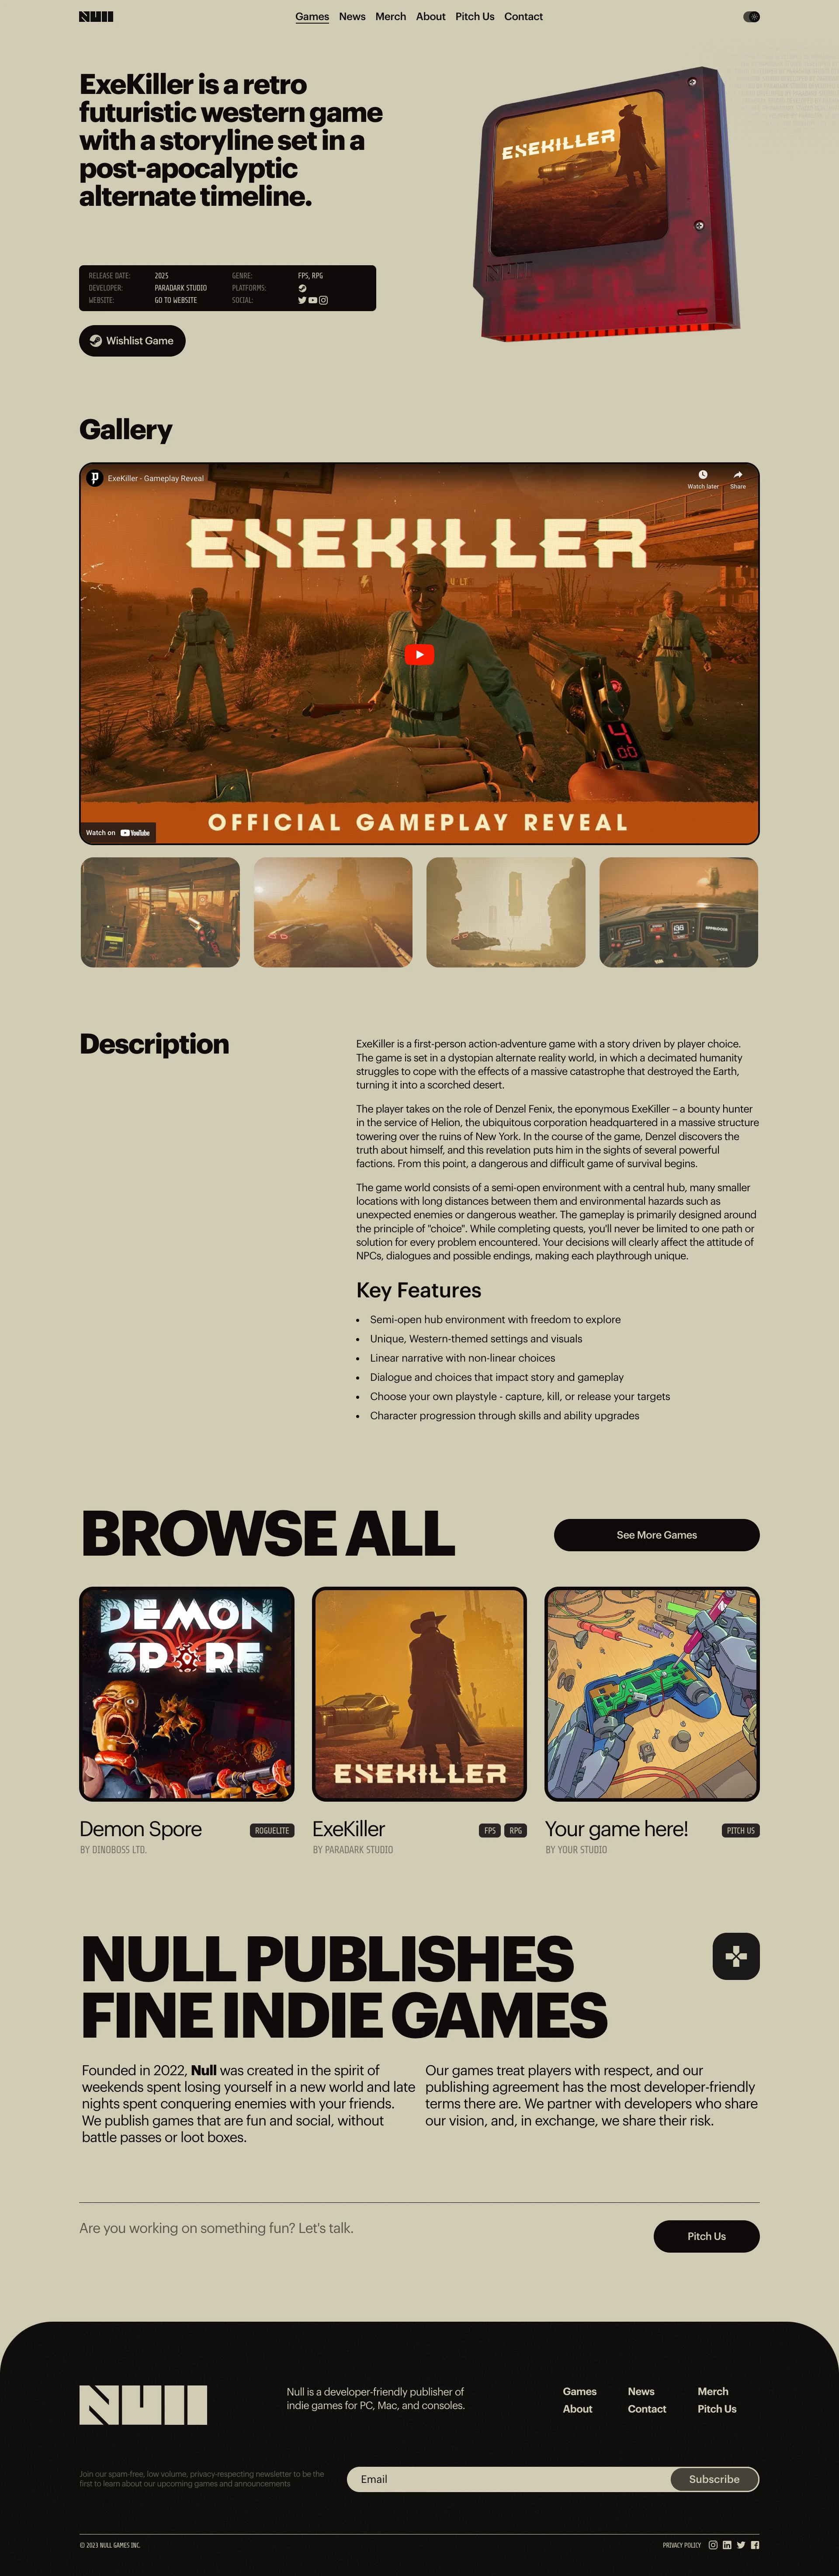 Null Games Landing Page Example: Null is a developer-friendly publisher of indie games for PC, Mac, and consoles.